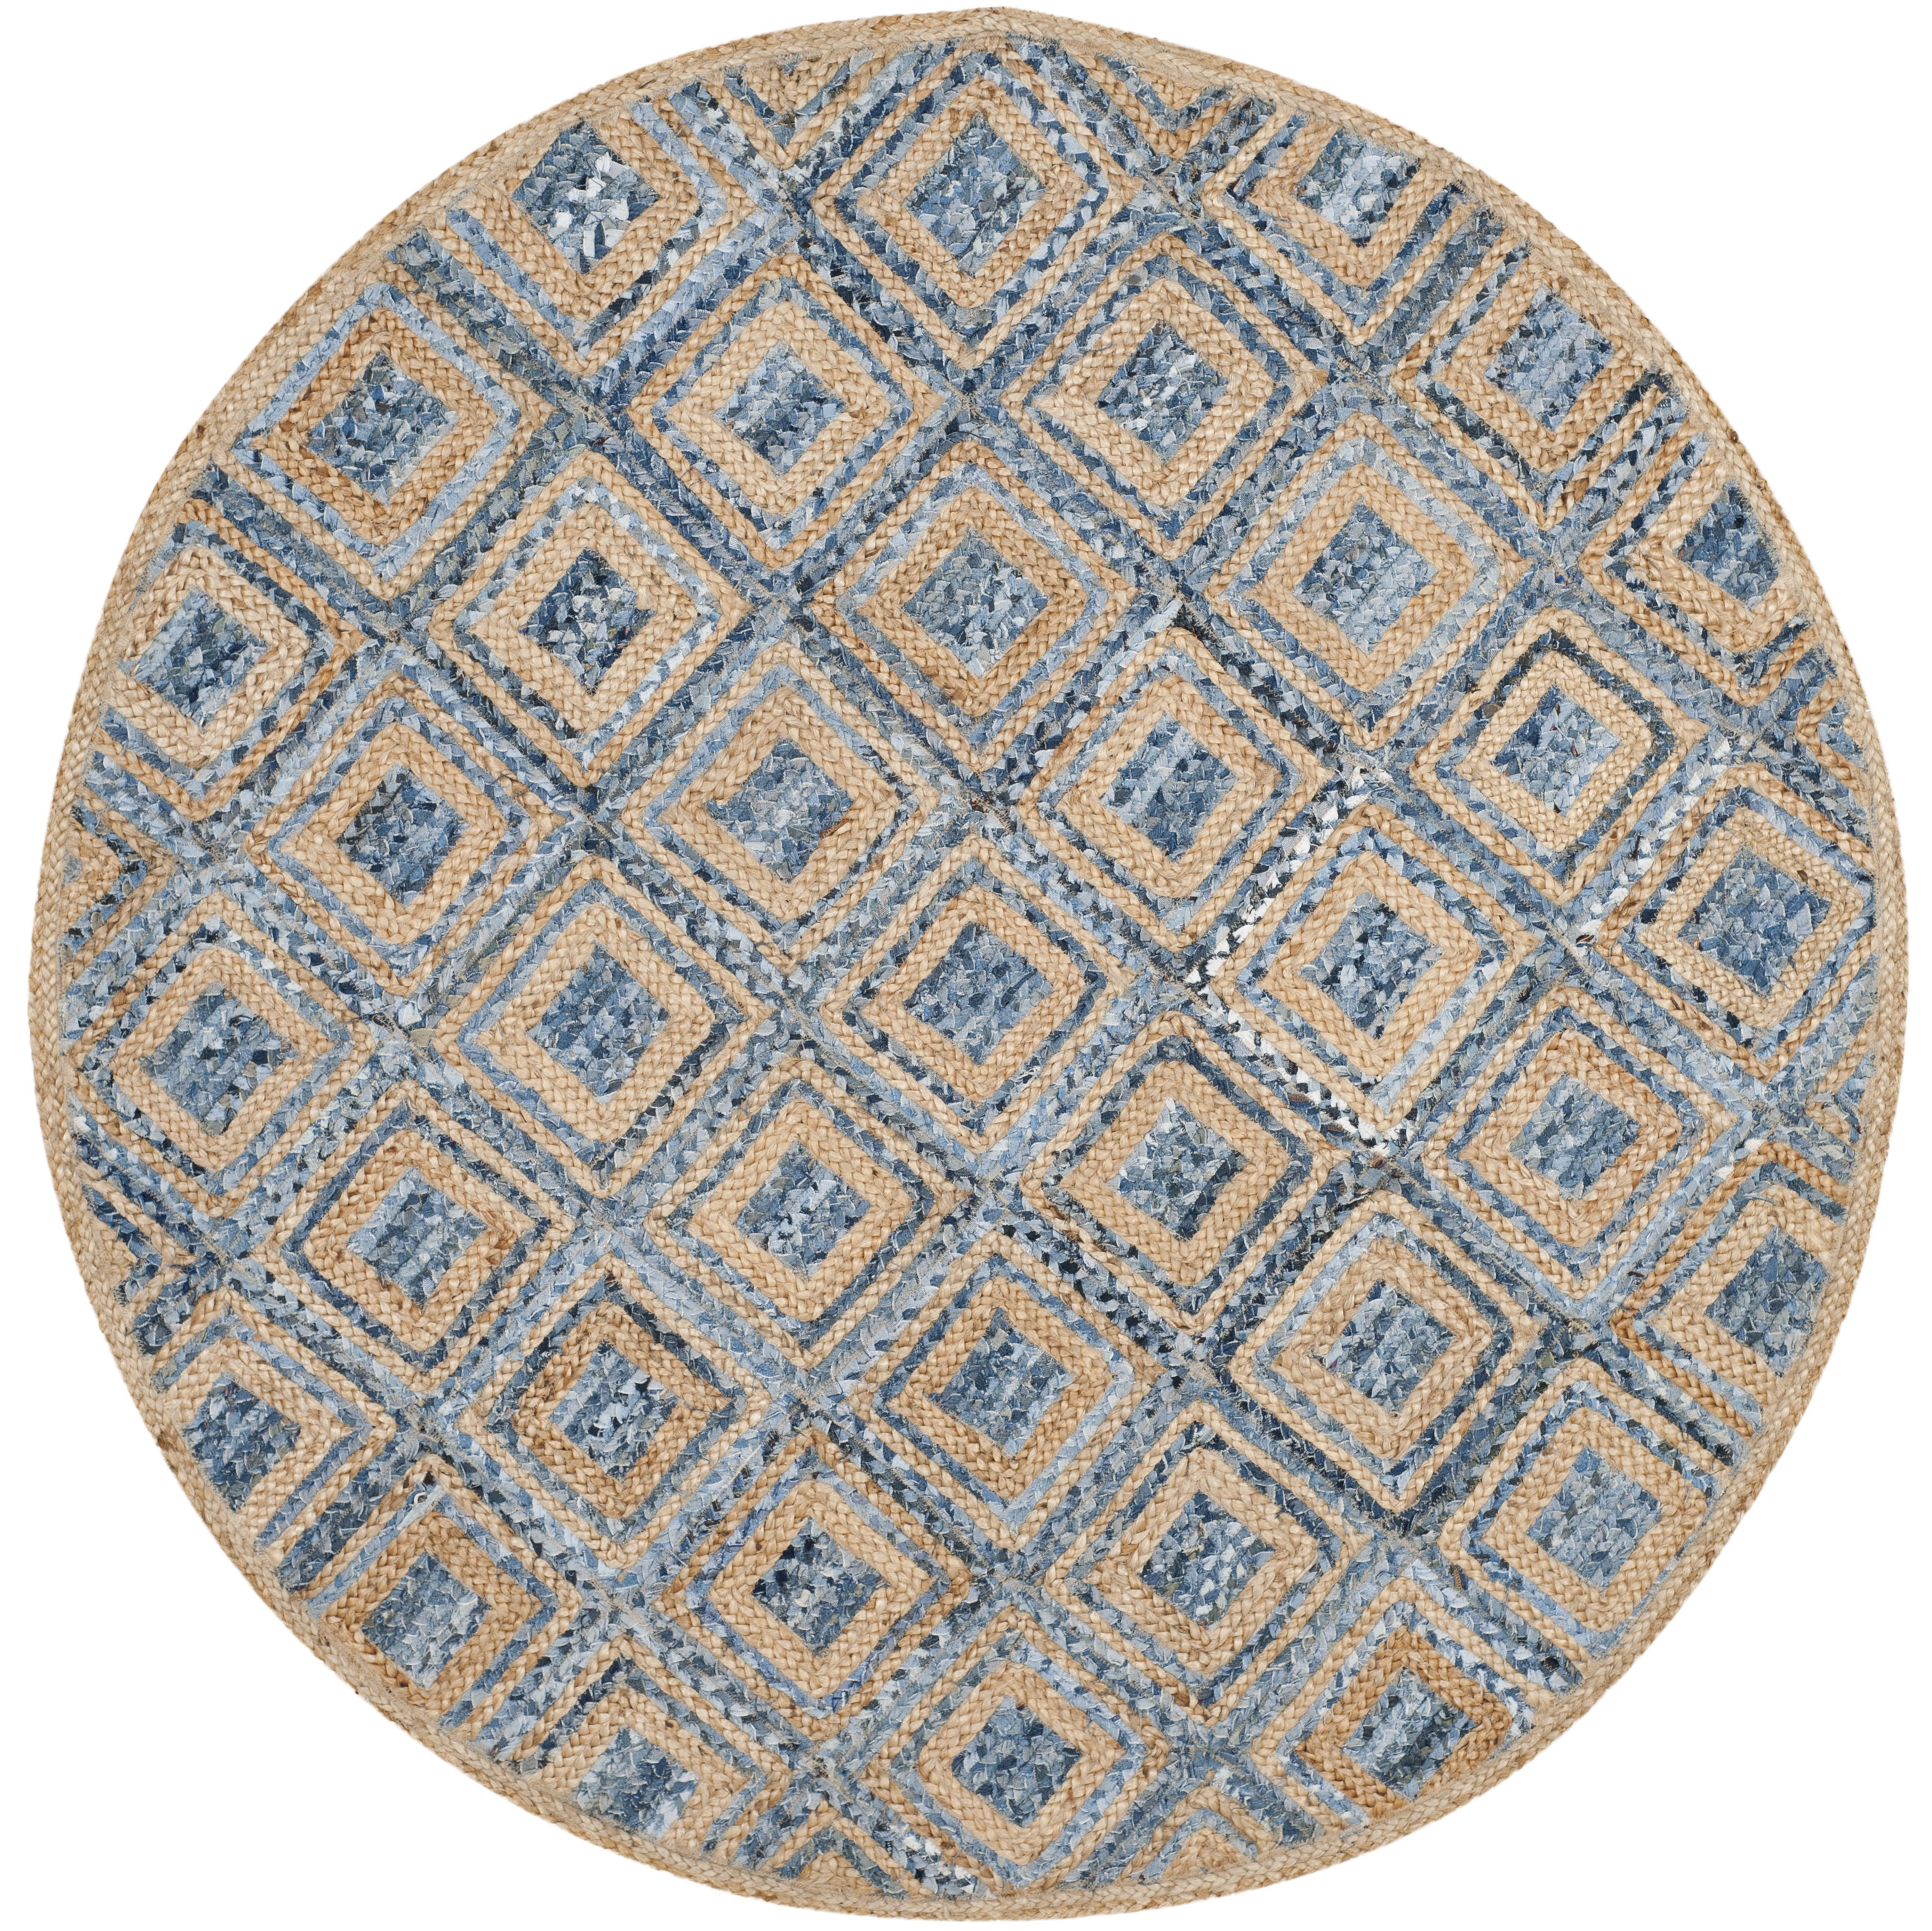 Arlo Home Hand Woven Area Rug, CAP354A, Natural/Blue,  6' X 6' Round - Image 0